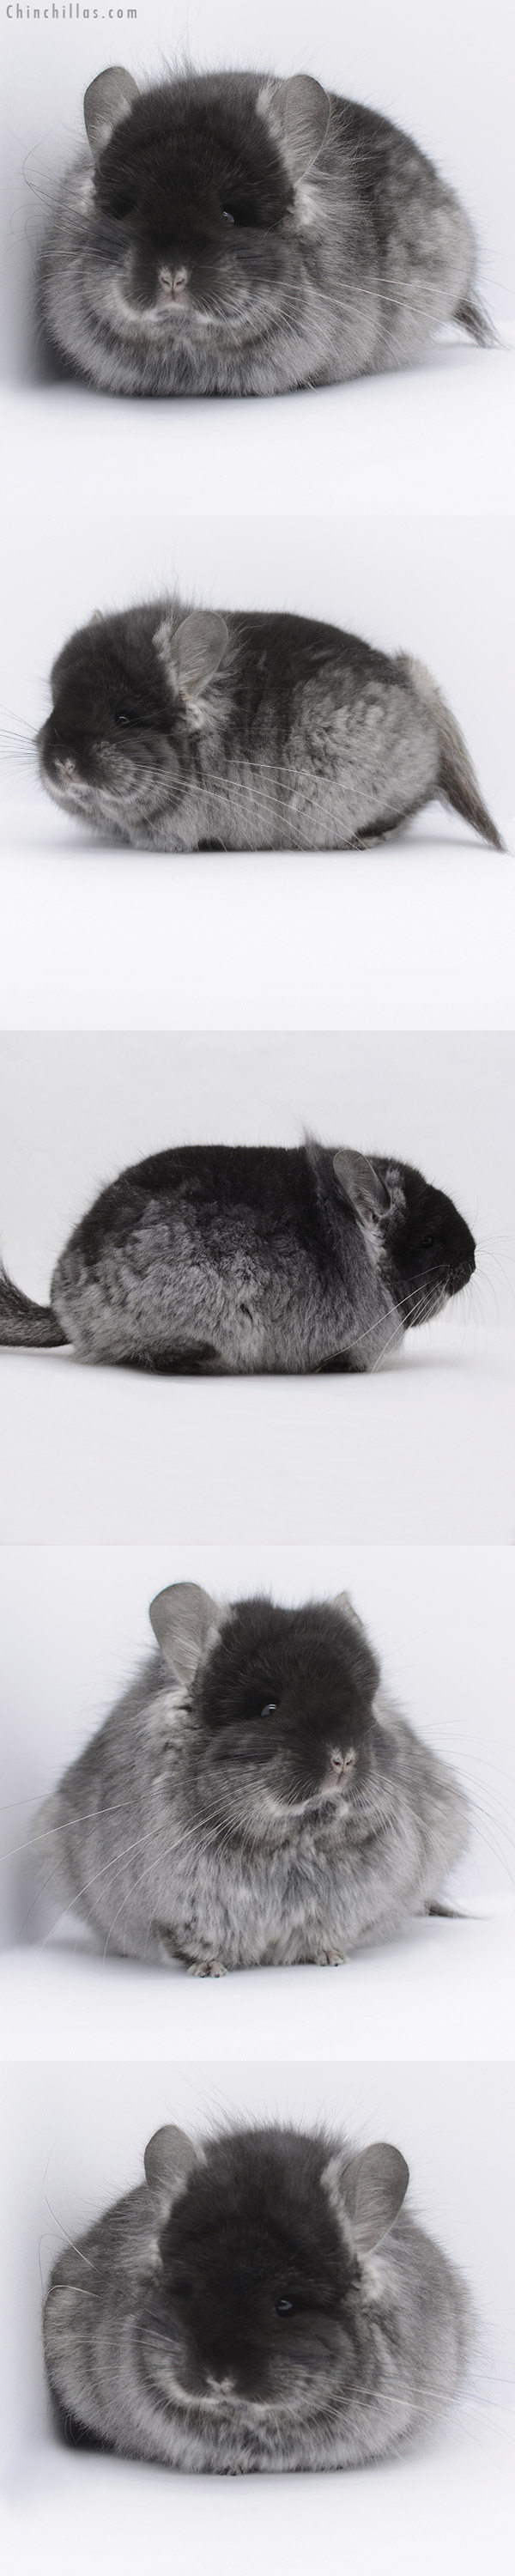 Chinchilla or related item offered for sale or export on Chinchillas.com - 20249 Large Blocky Brevi Type Black Velvet  Royal Persian Angora Female Chinchilla